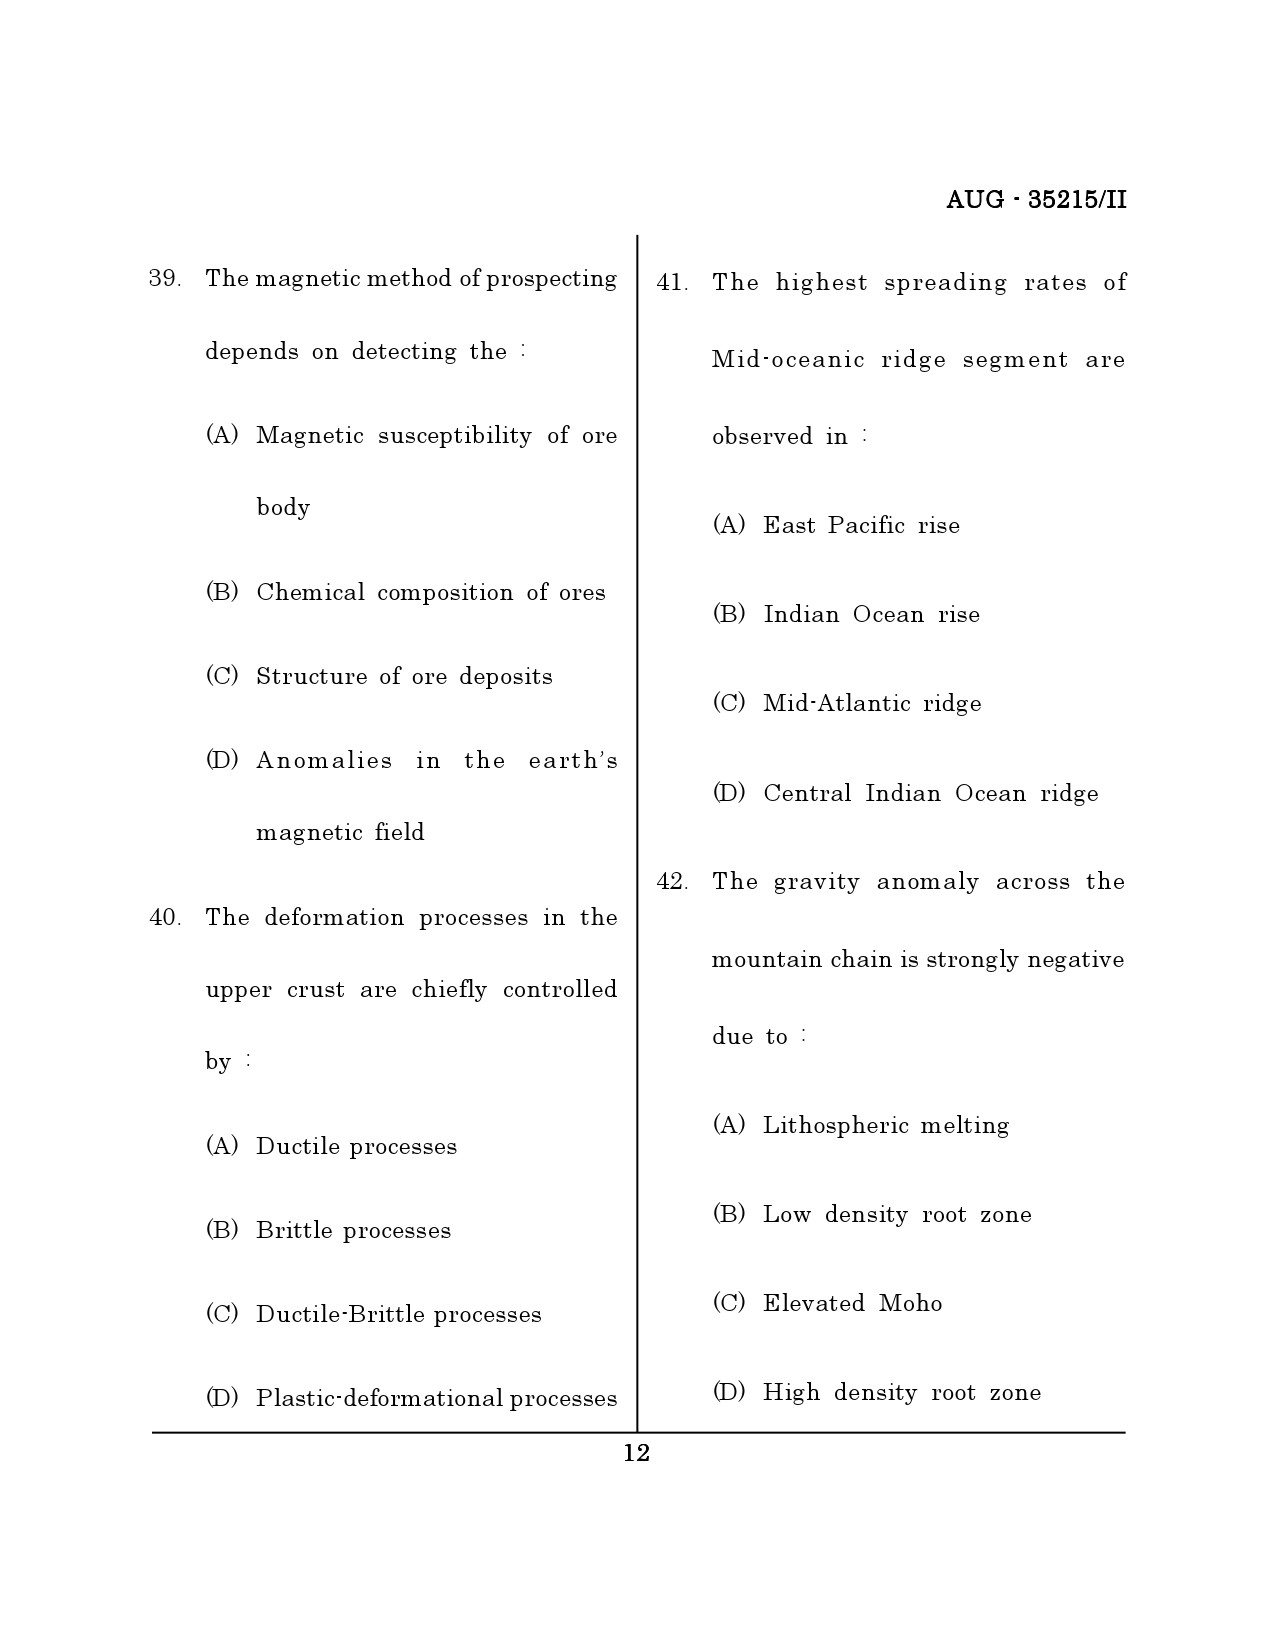 Maharashtra SET Earth Atmospheric Ocean Planetary Science Question Paper II August 2015 11